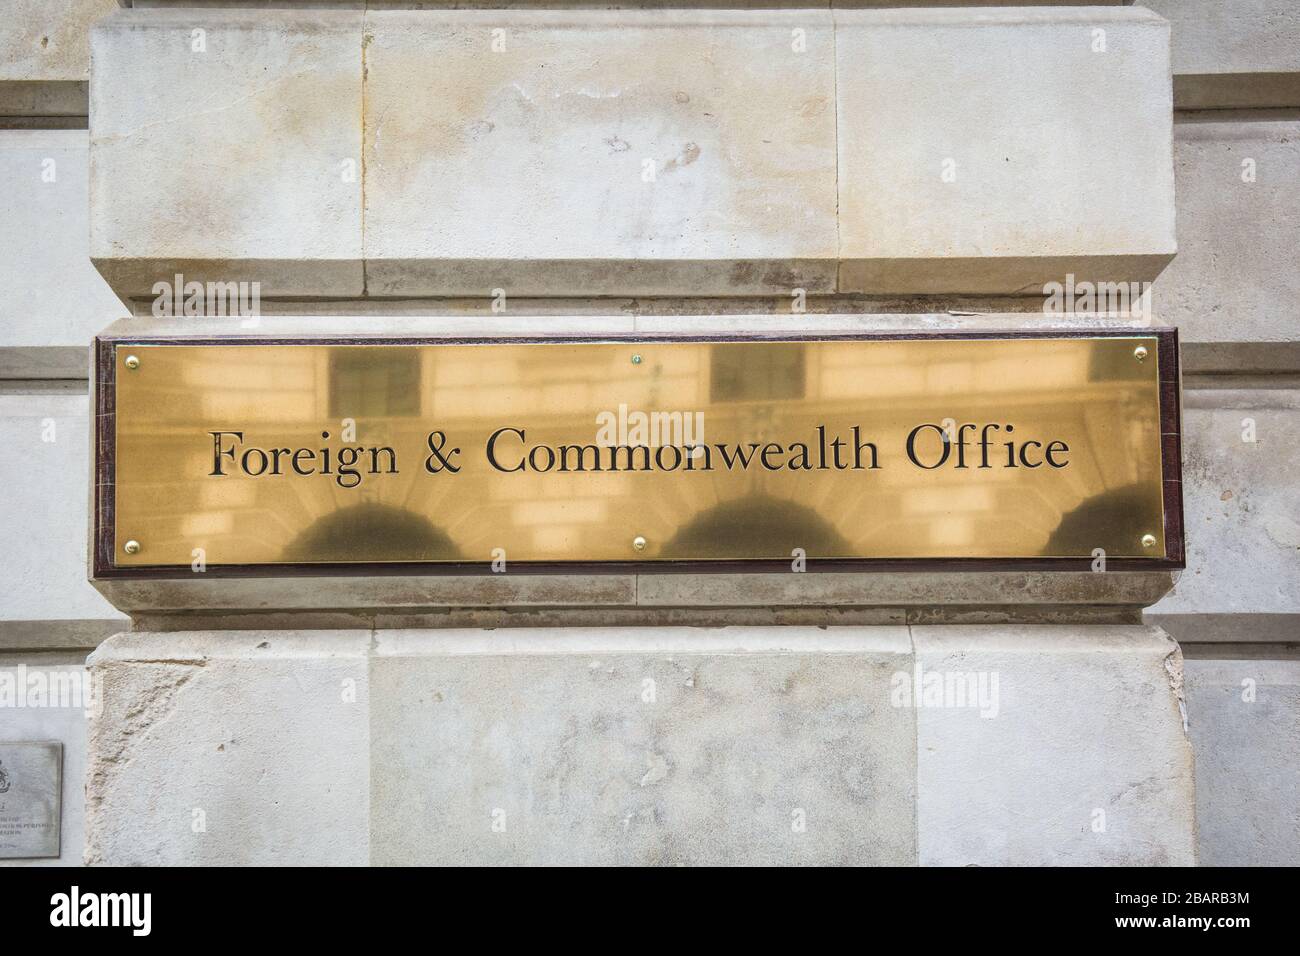 LONDON- Foreign and Commonwealth Office, UK government building exterior signage- located on Whitehall, Westminster Stock Photo